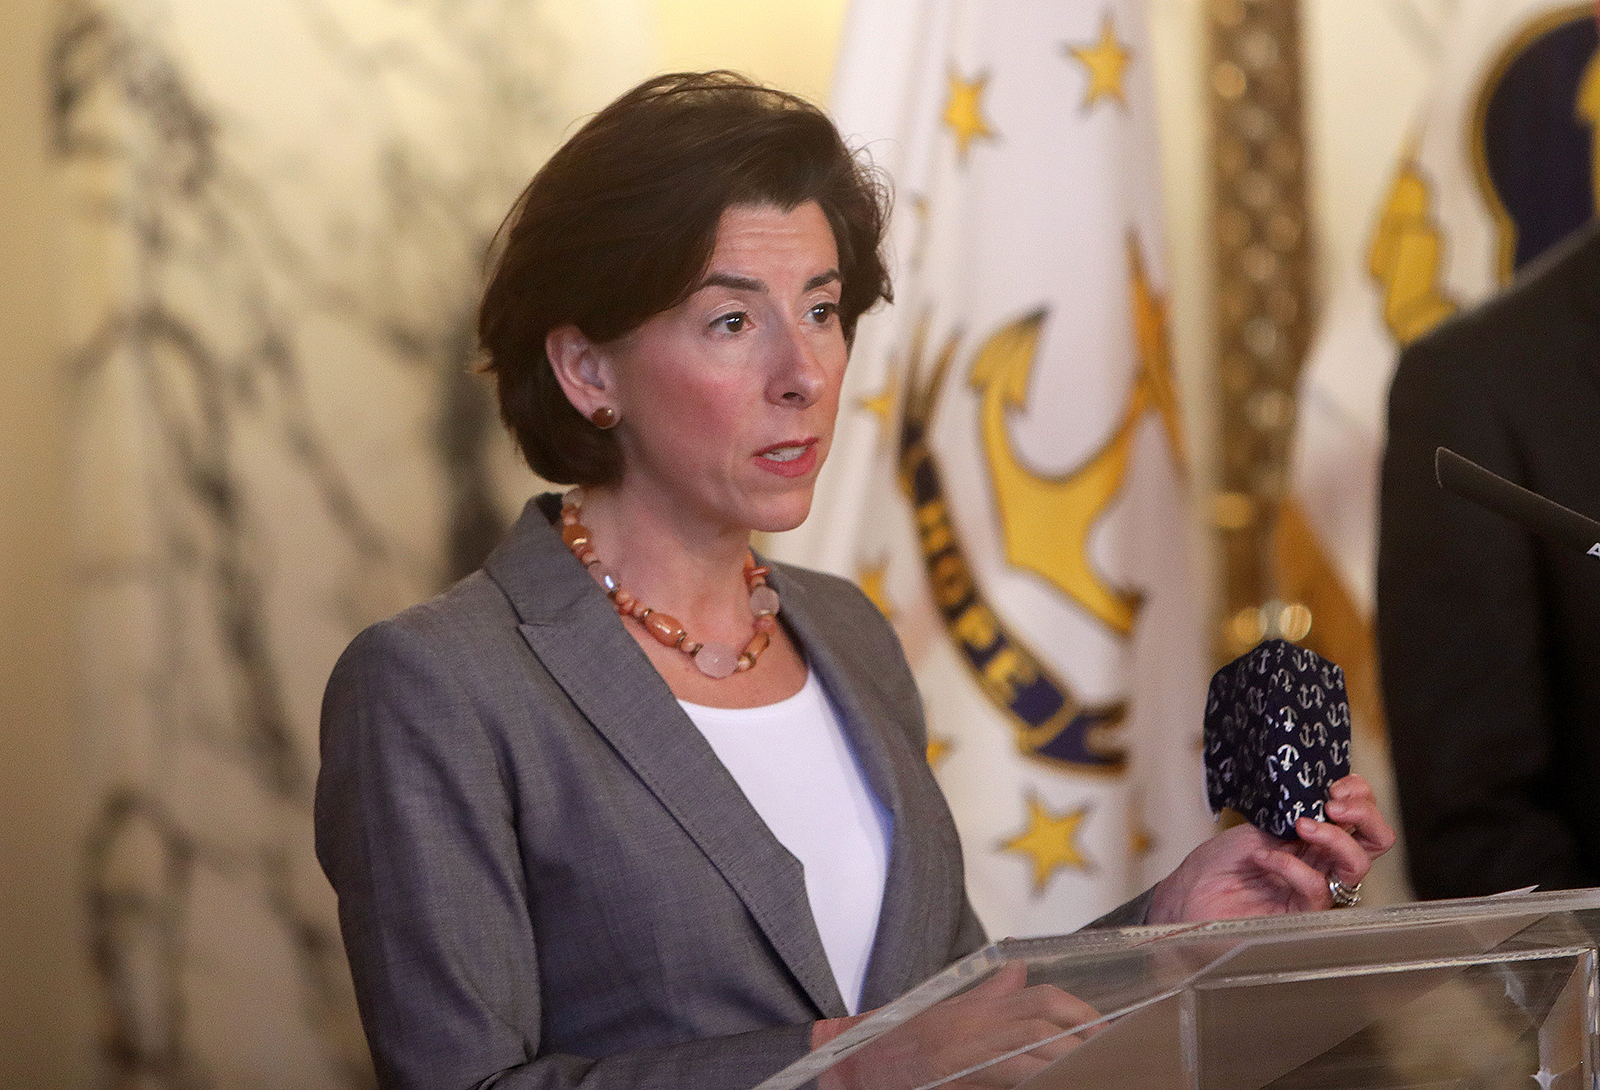 Rhode Island Gov. Gina Raimondo, holding her mask in her left hand, speaks during a press conference in Providence, Rhode Island on April 14.